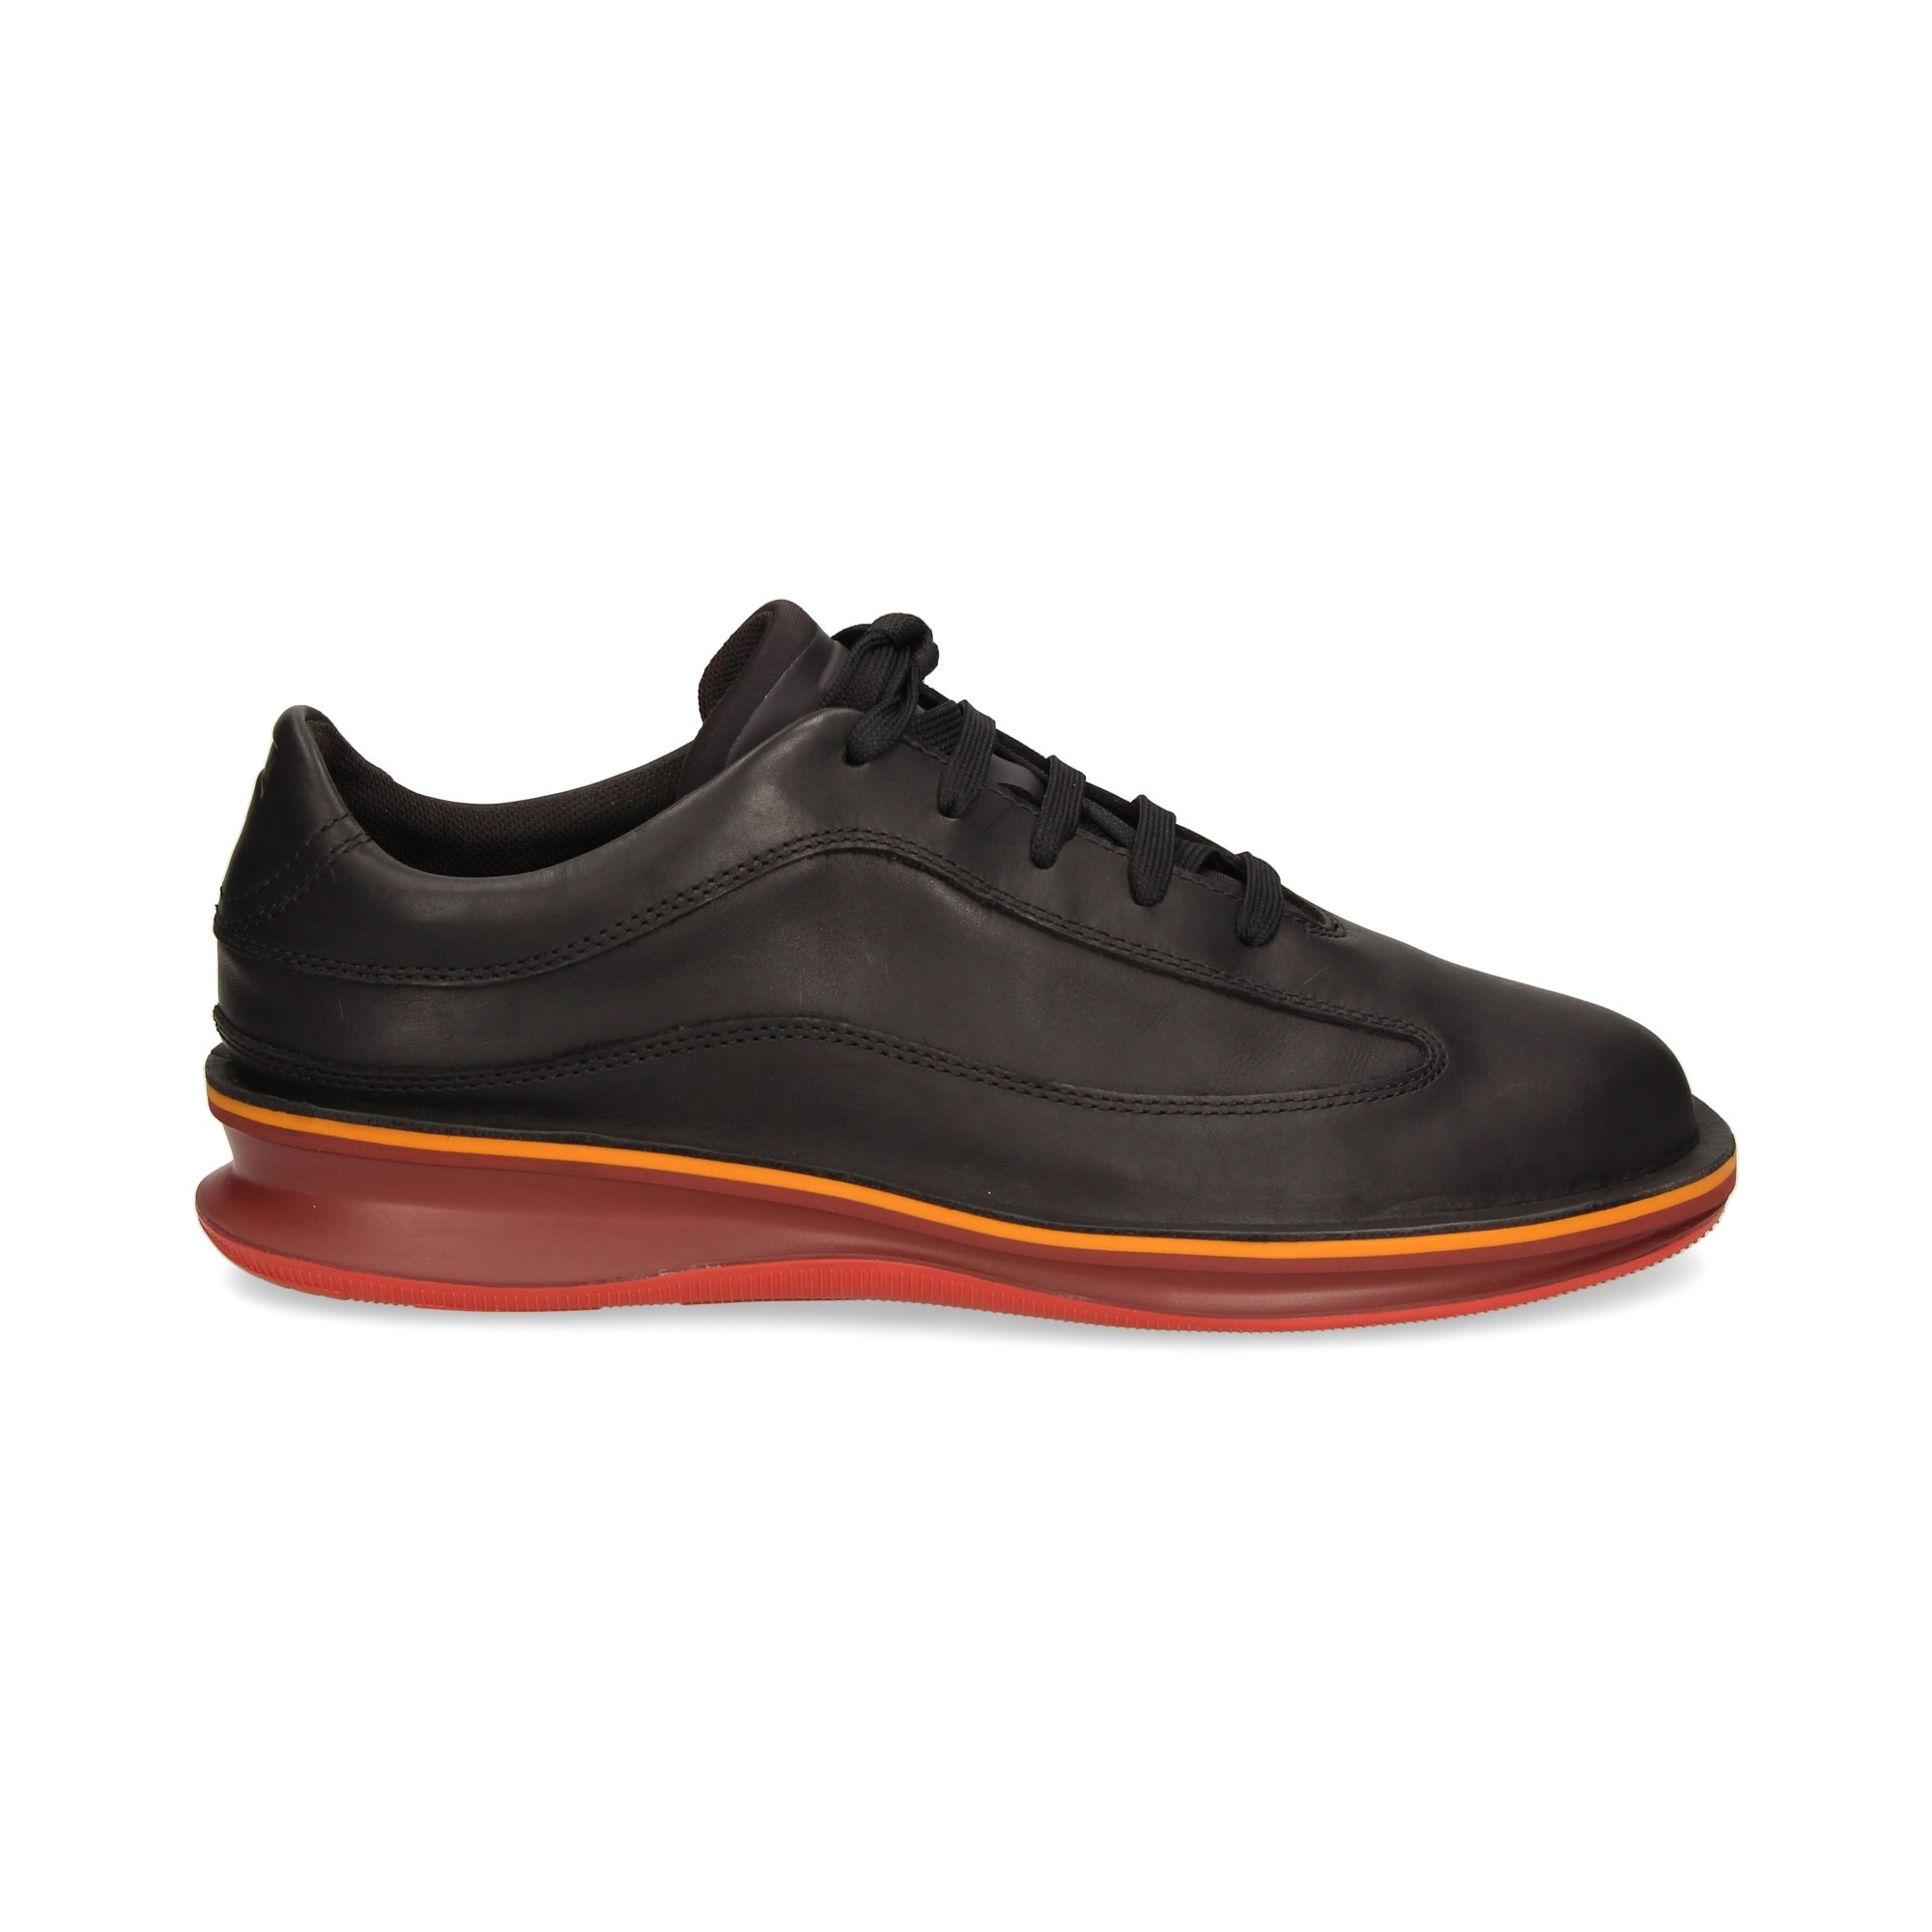 sporty-black-leather-red-sole